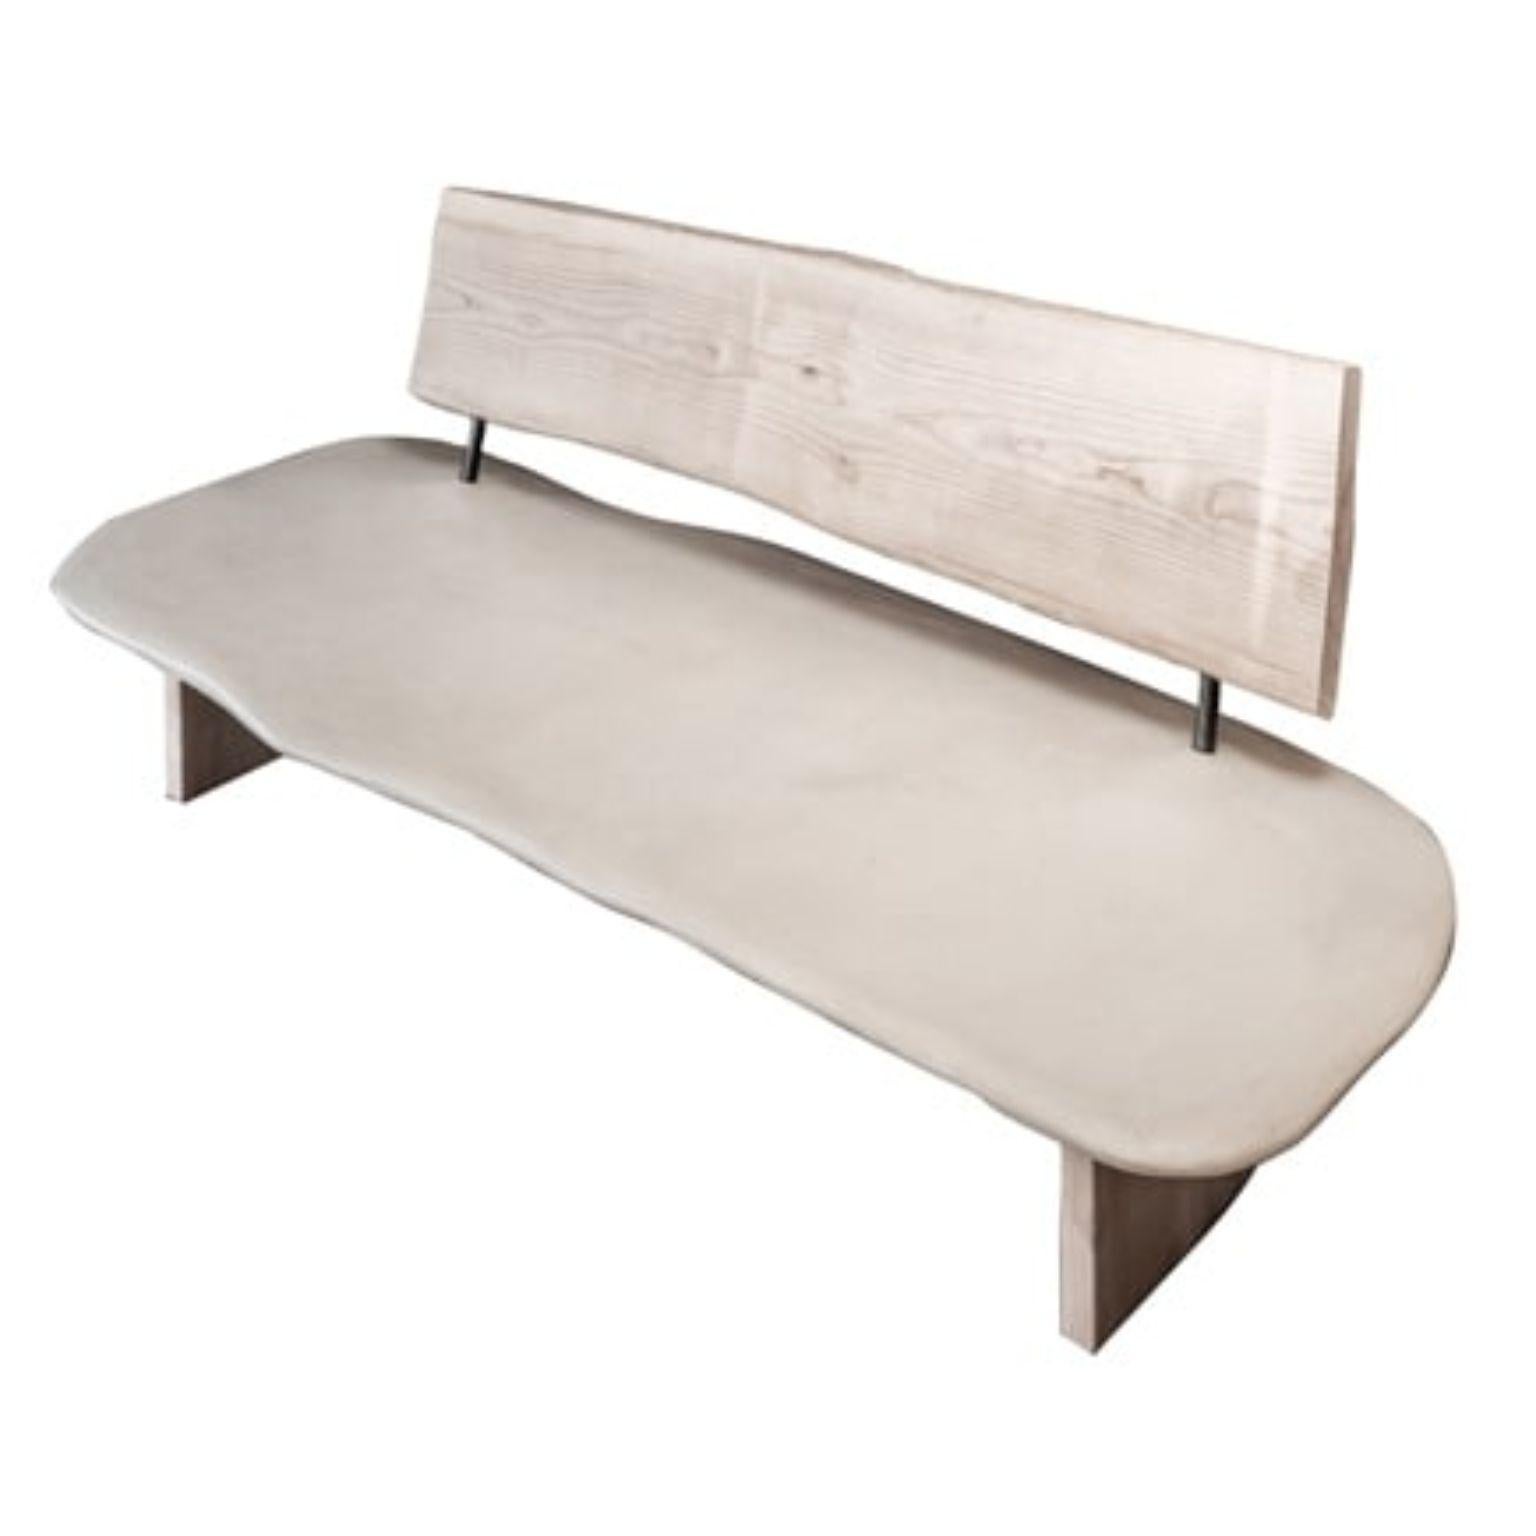 Menaggio bench by Studio Emblématique
Dimensions: W 200 x D 75 x H 33 cm
Materials: Stonegrain seet, oakwood back and legs


Pushing the boundaries, going the extra mile to find the extraordinary piece that defines the space. Embracing